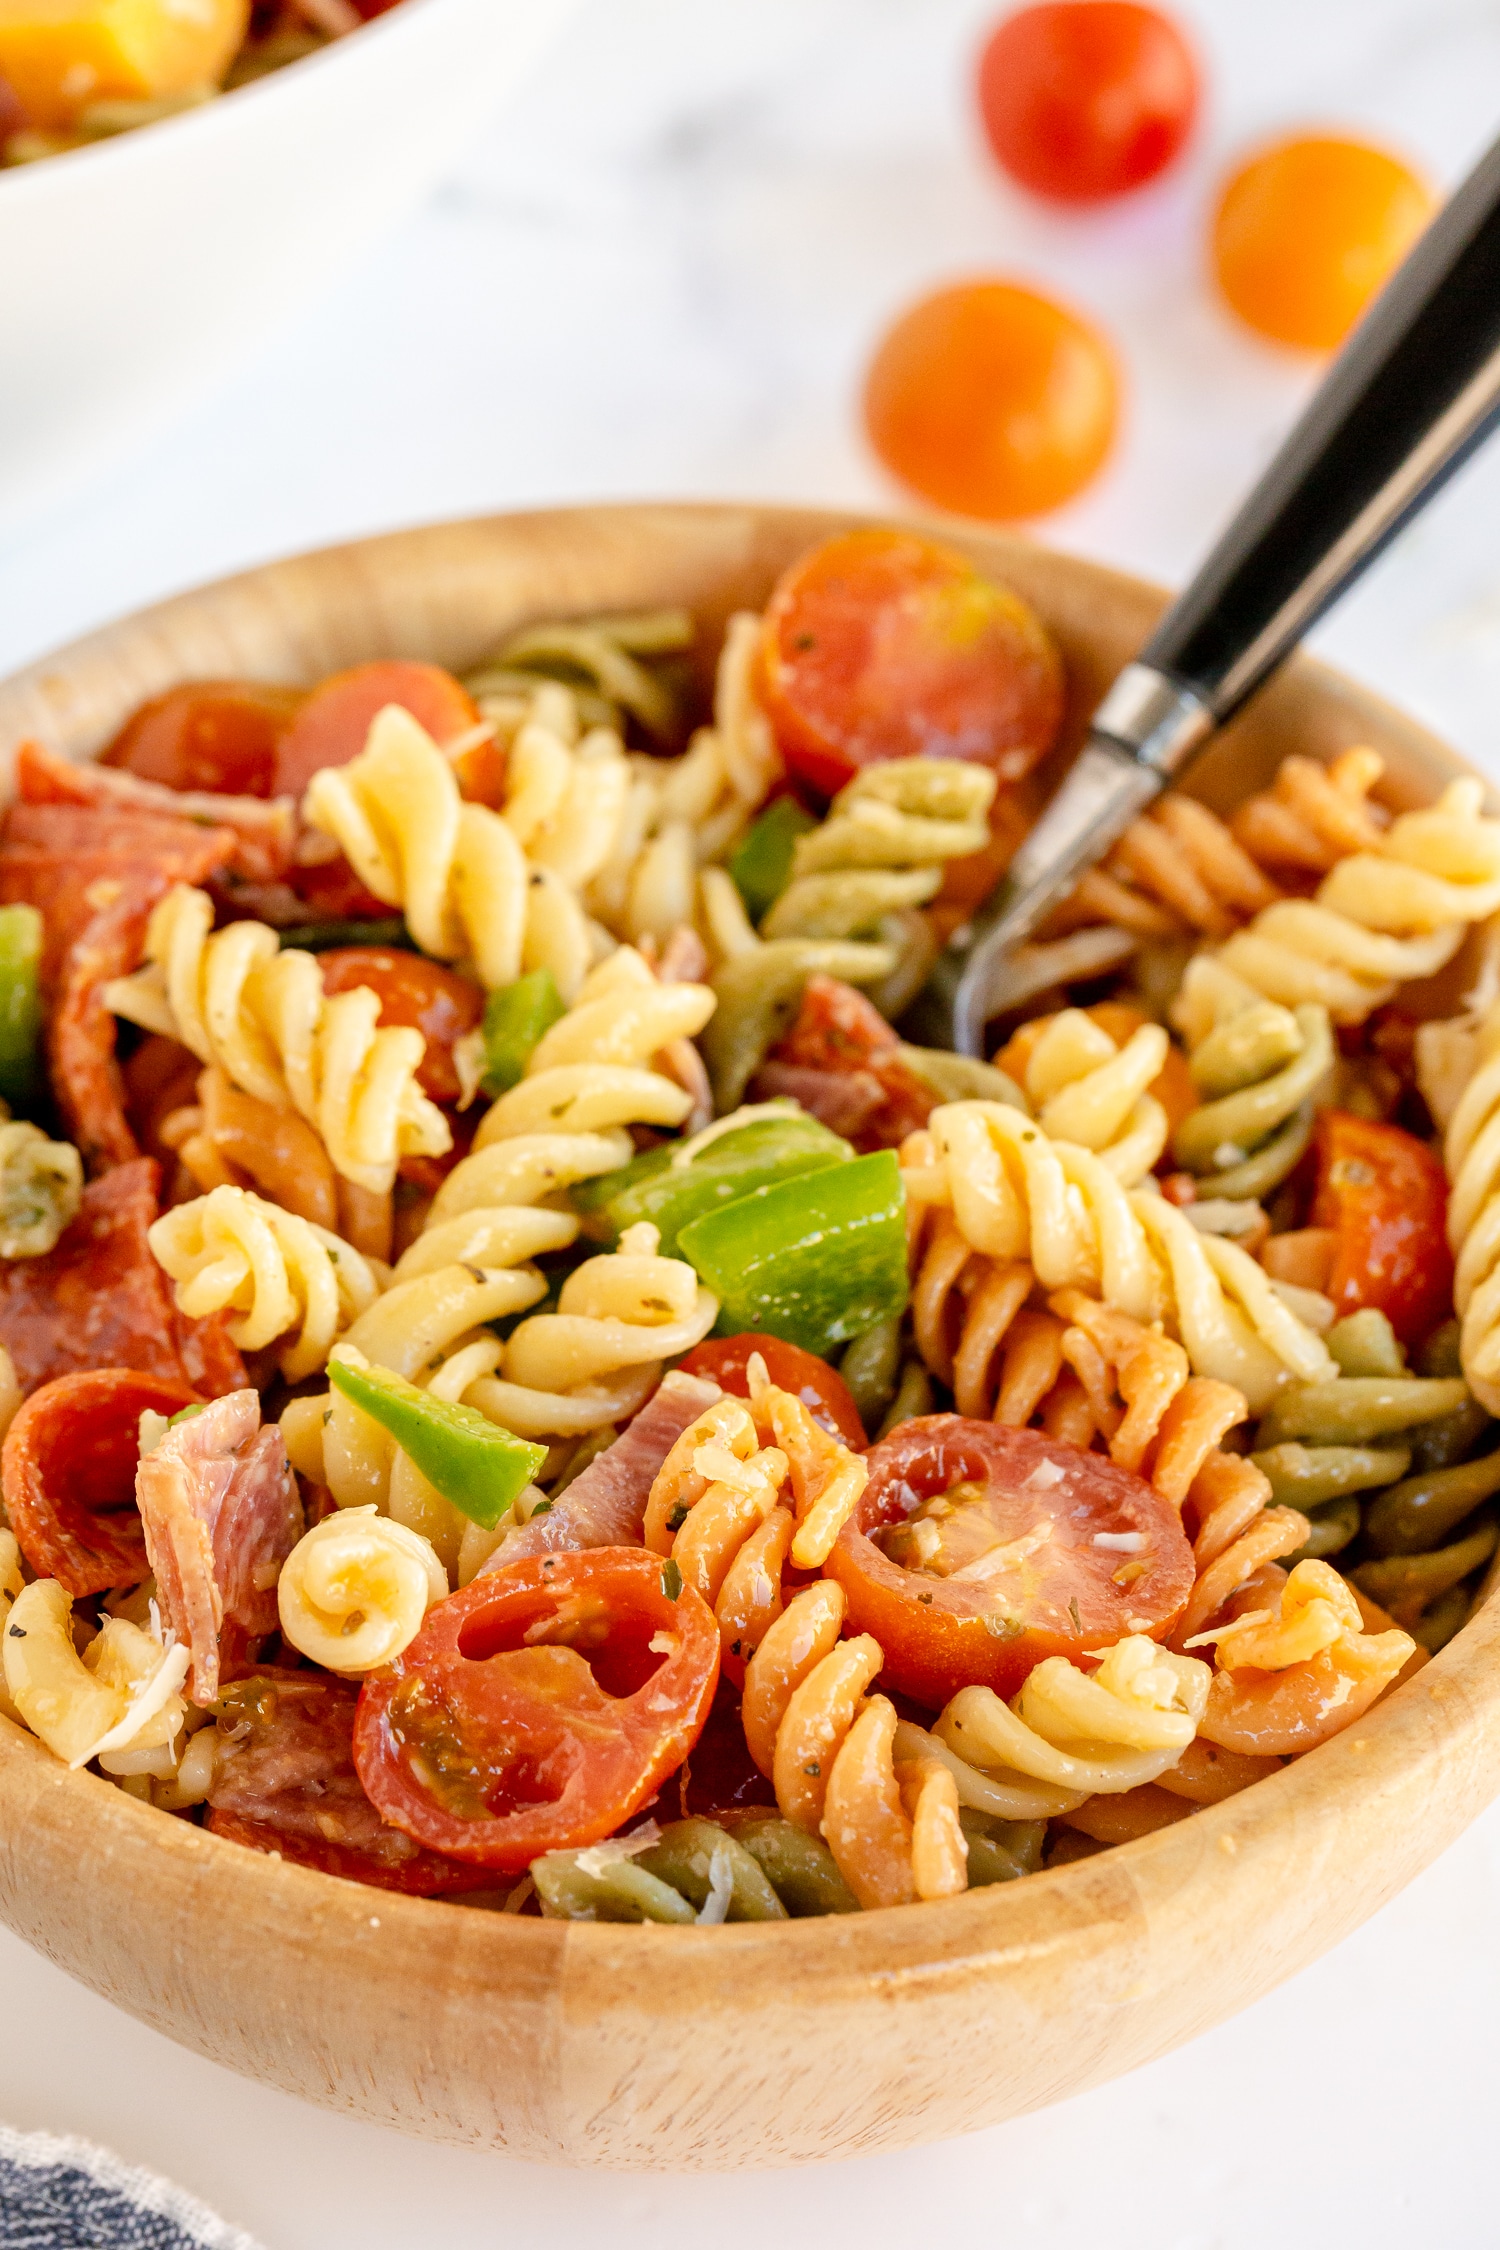 serving of pasta salad in wooden bowl